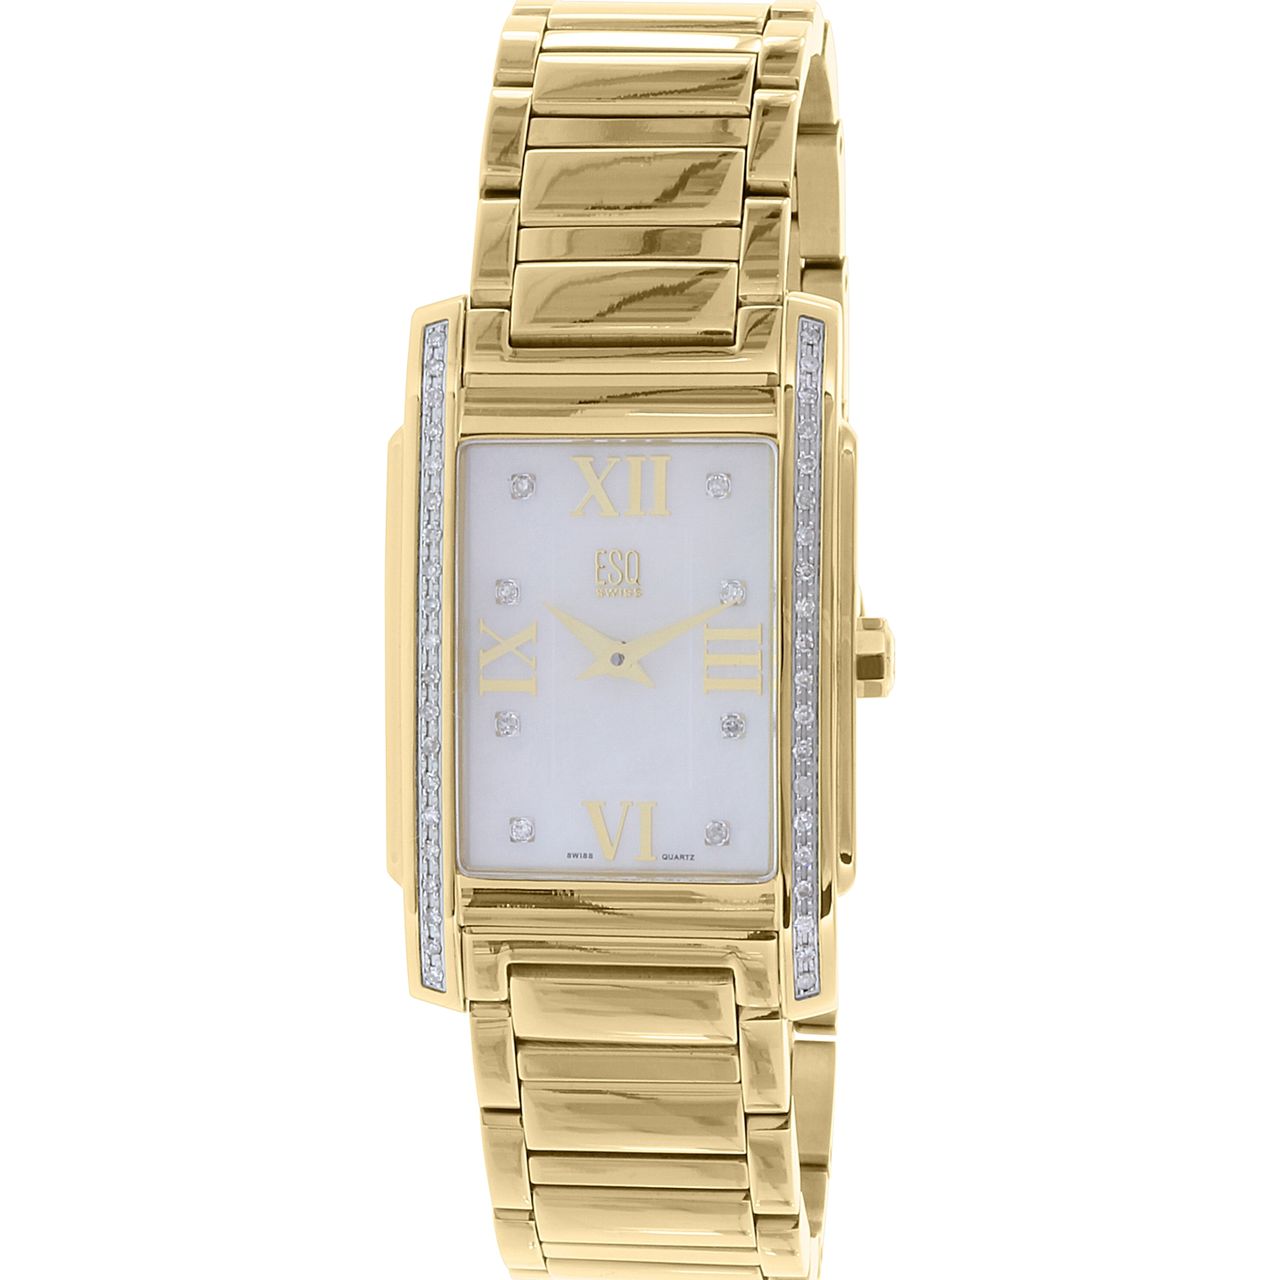 Esq 07101257 Womens Mop Dial Analog Quartz Watch with Stainless Steel Strap